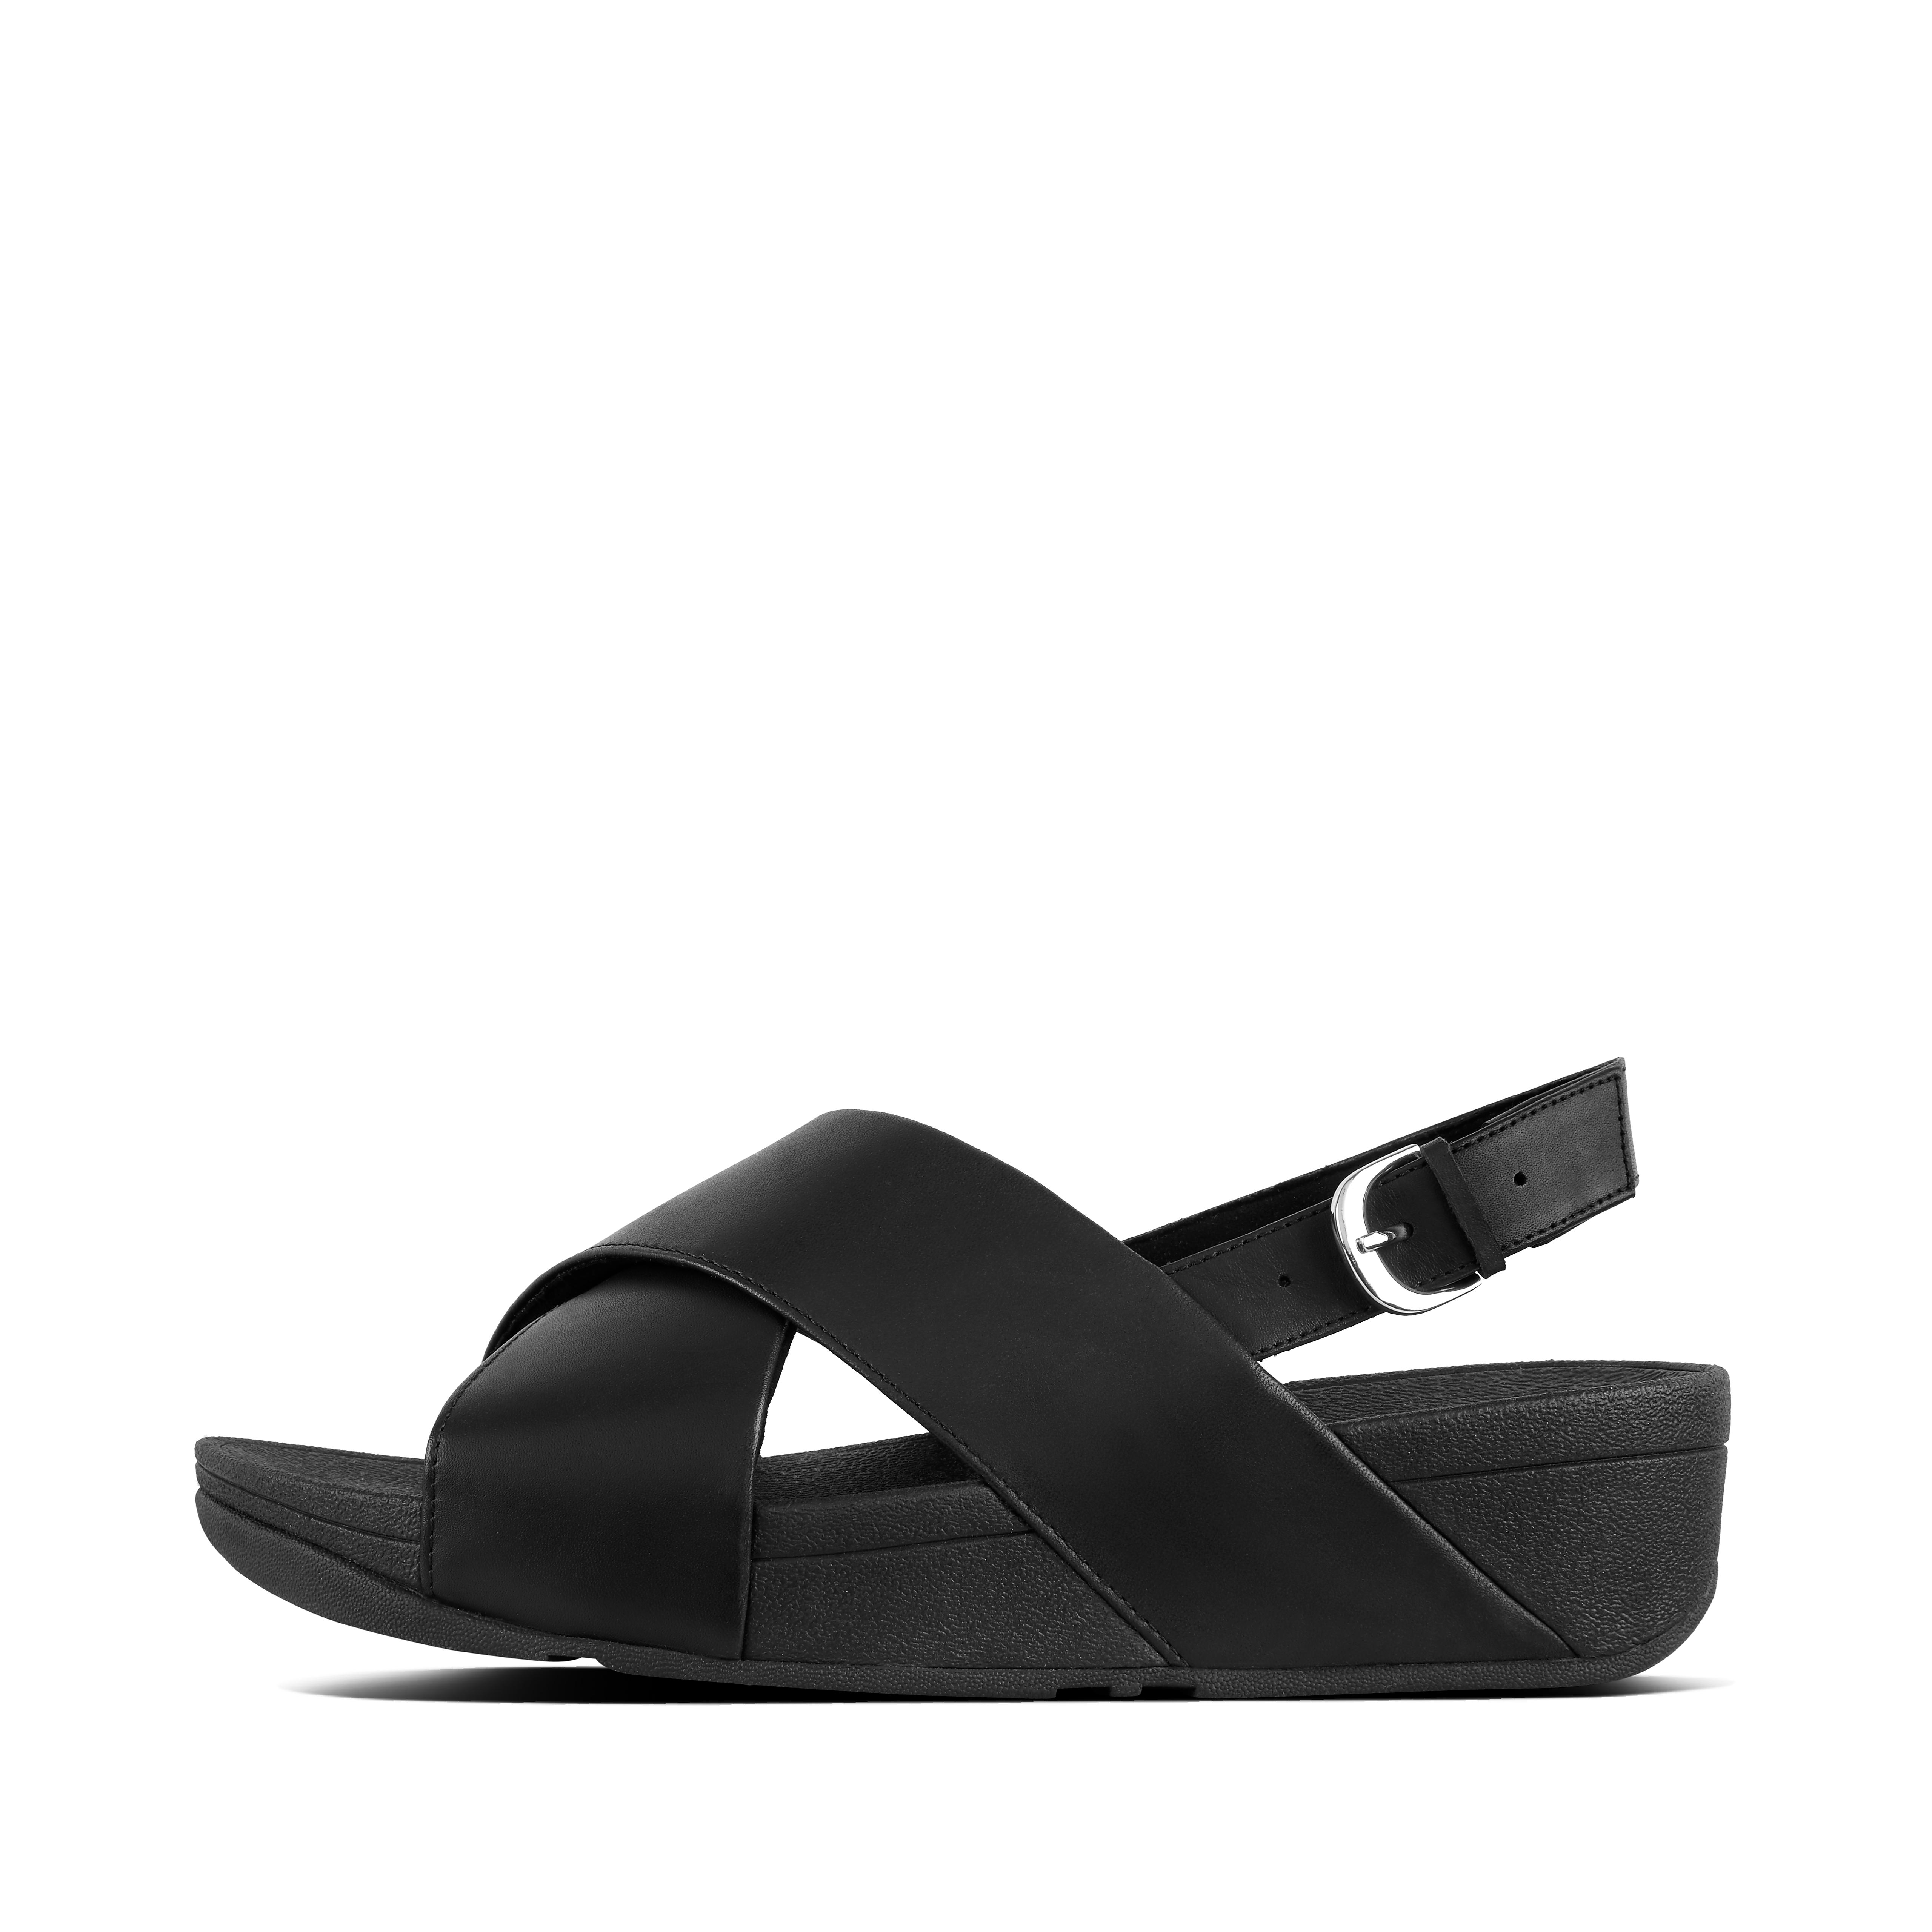 fittop sandals